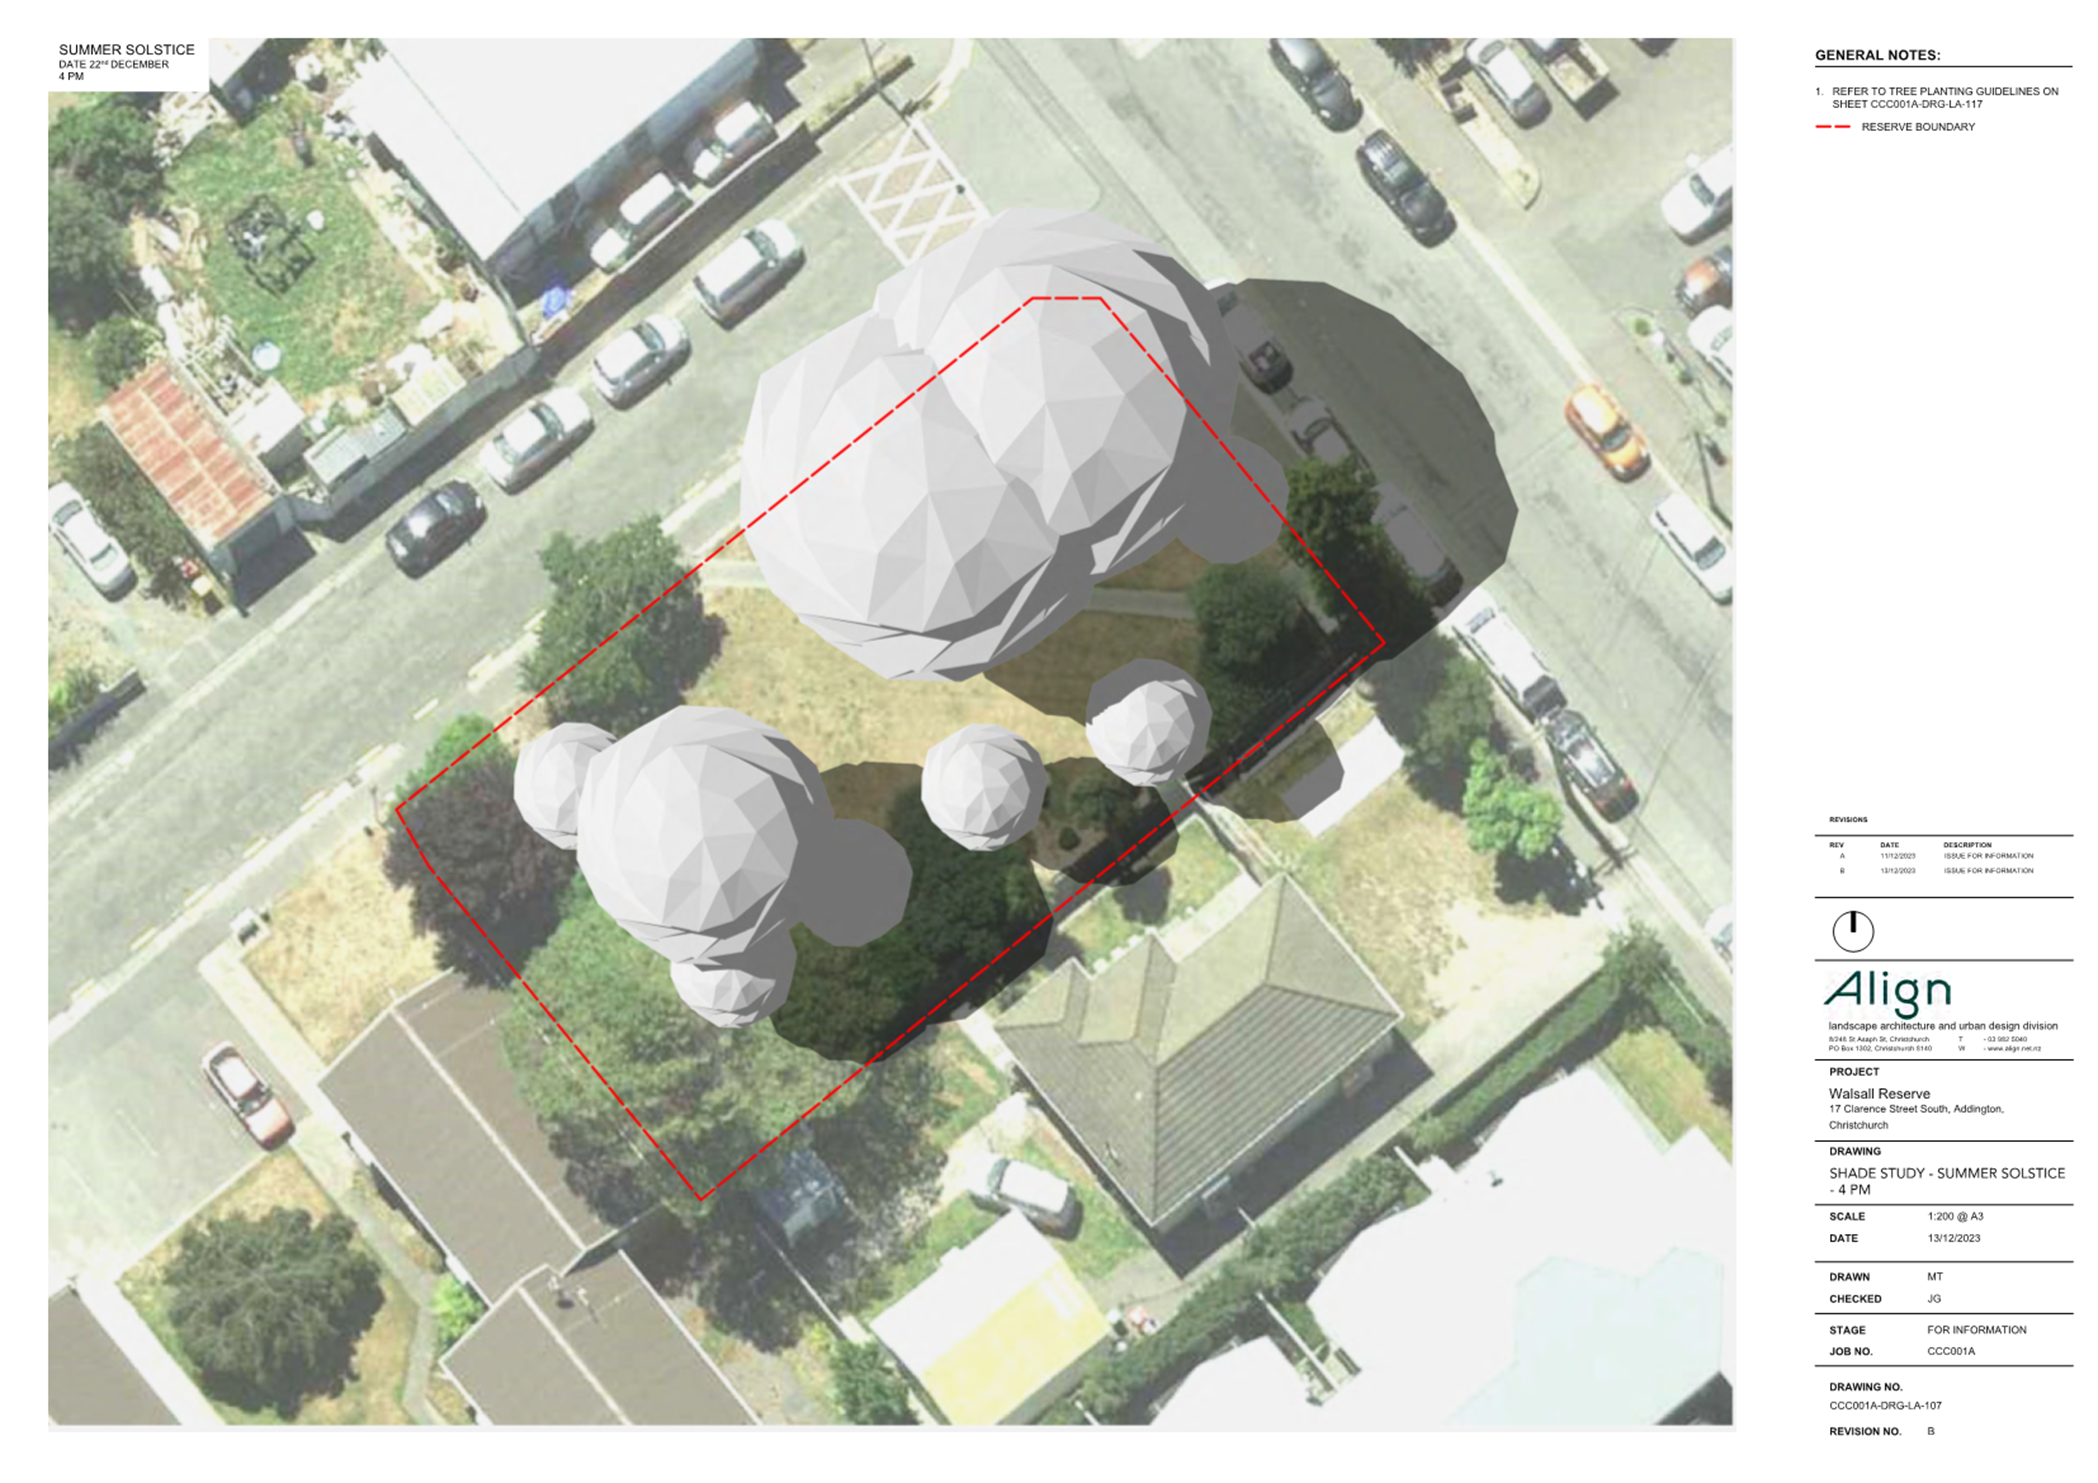 A bird's eye view of a building

Description automatically generated